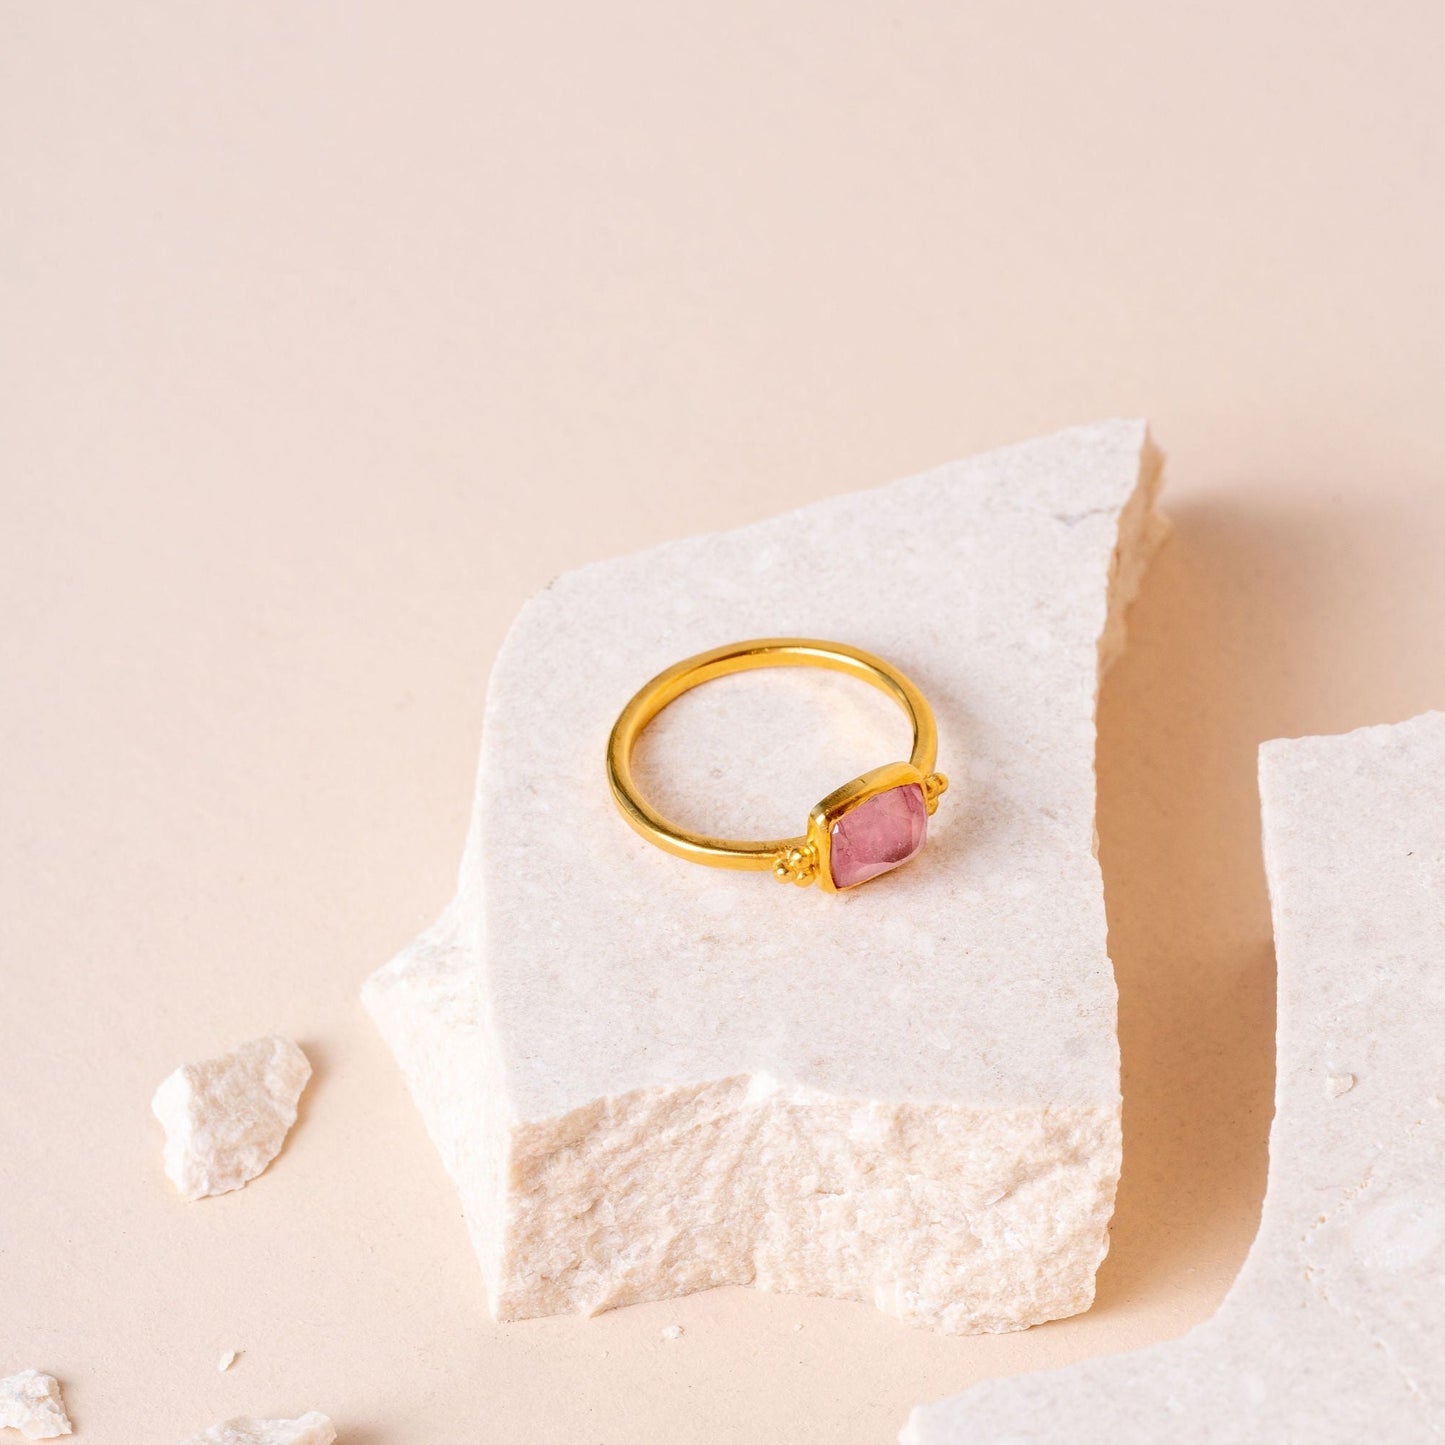 Charming gold ring with delicate granulation and a small, hand-cut light pink tourmaline.